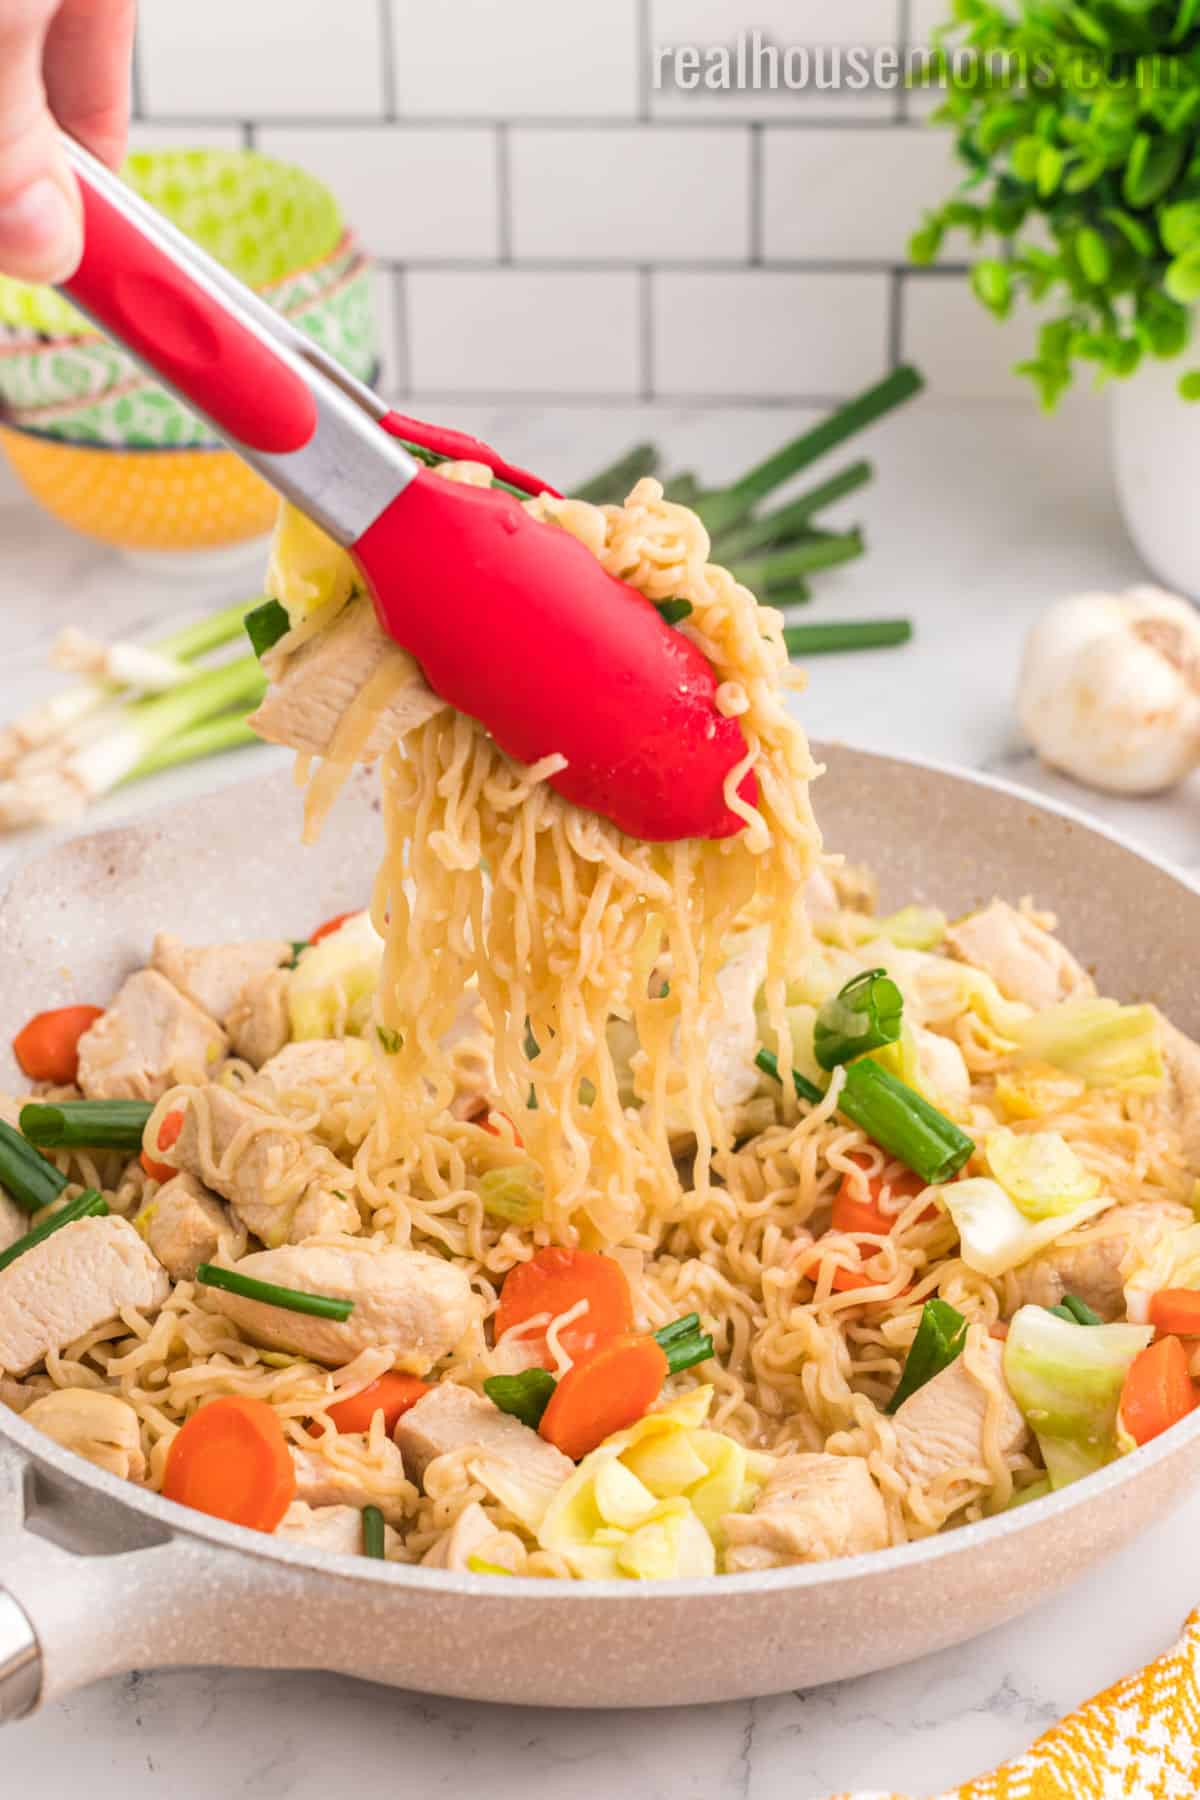 Quickly make perfectly sized ramen noodles, pasta, soups, stir-fry